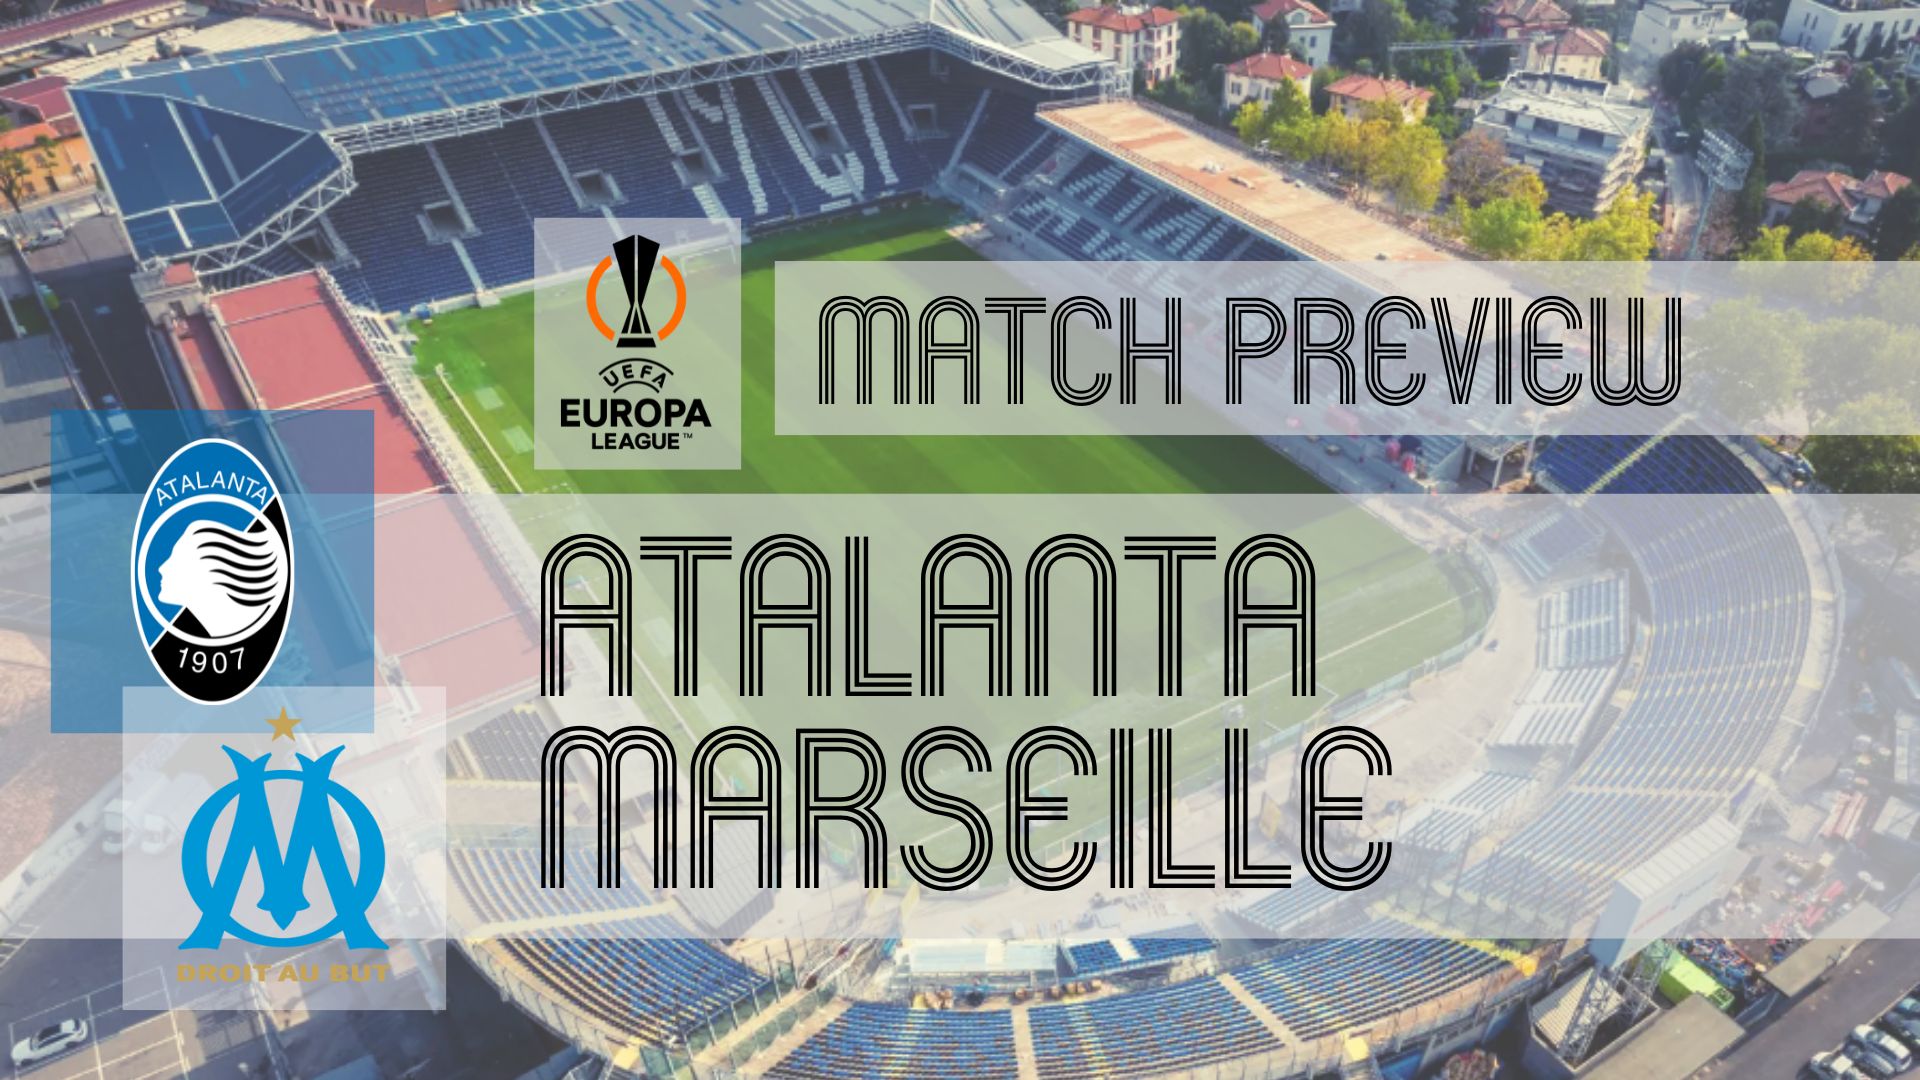 A place in the Europa League showpiece event is up for grabs as Atalanta and Marseille go head-to-head in the return leg of their semi-final tie